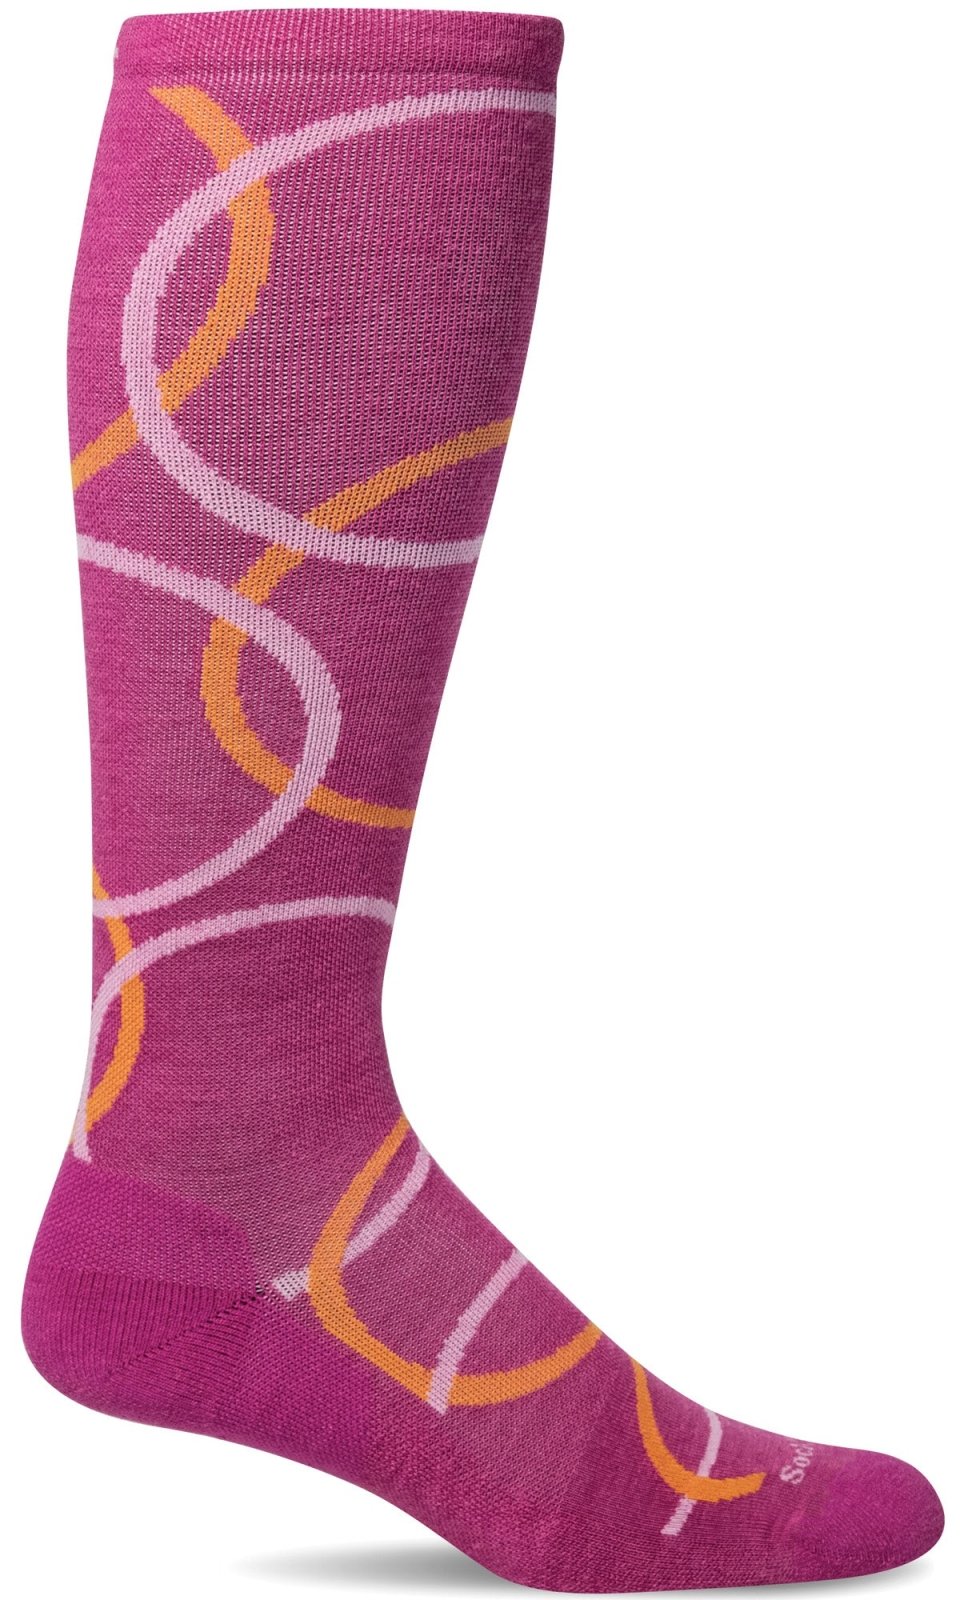 Women's In the Loop | Moderate Graduated Compression Socks - Merino Wool Lifestyle Compression - Sockwell